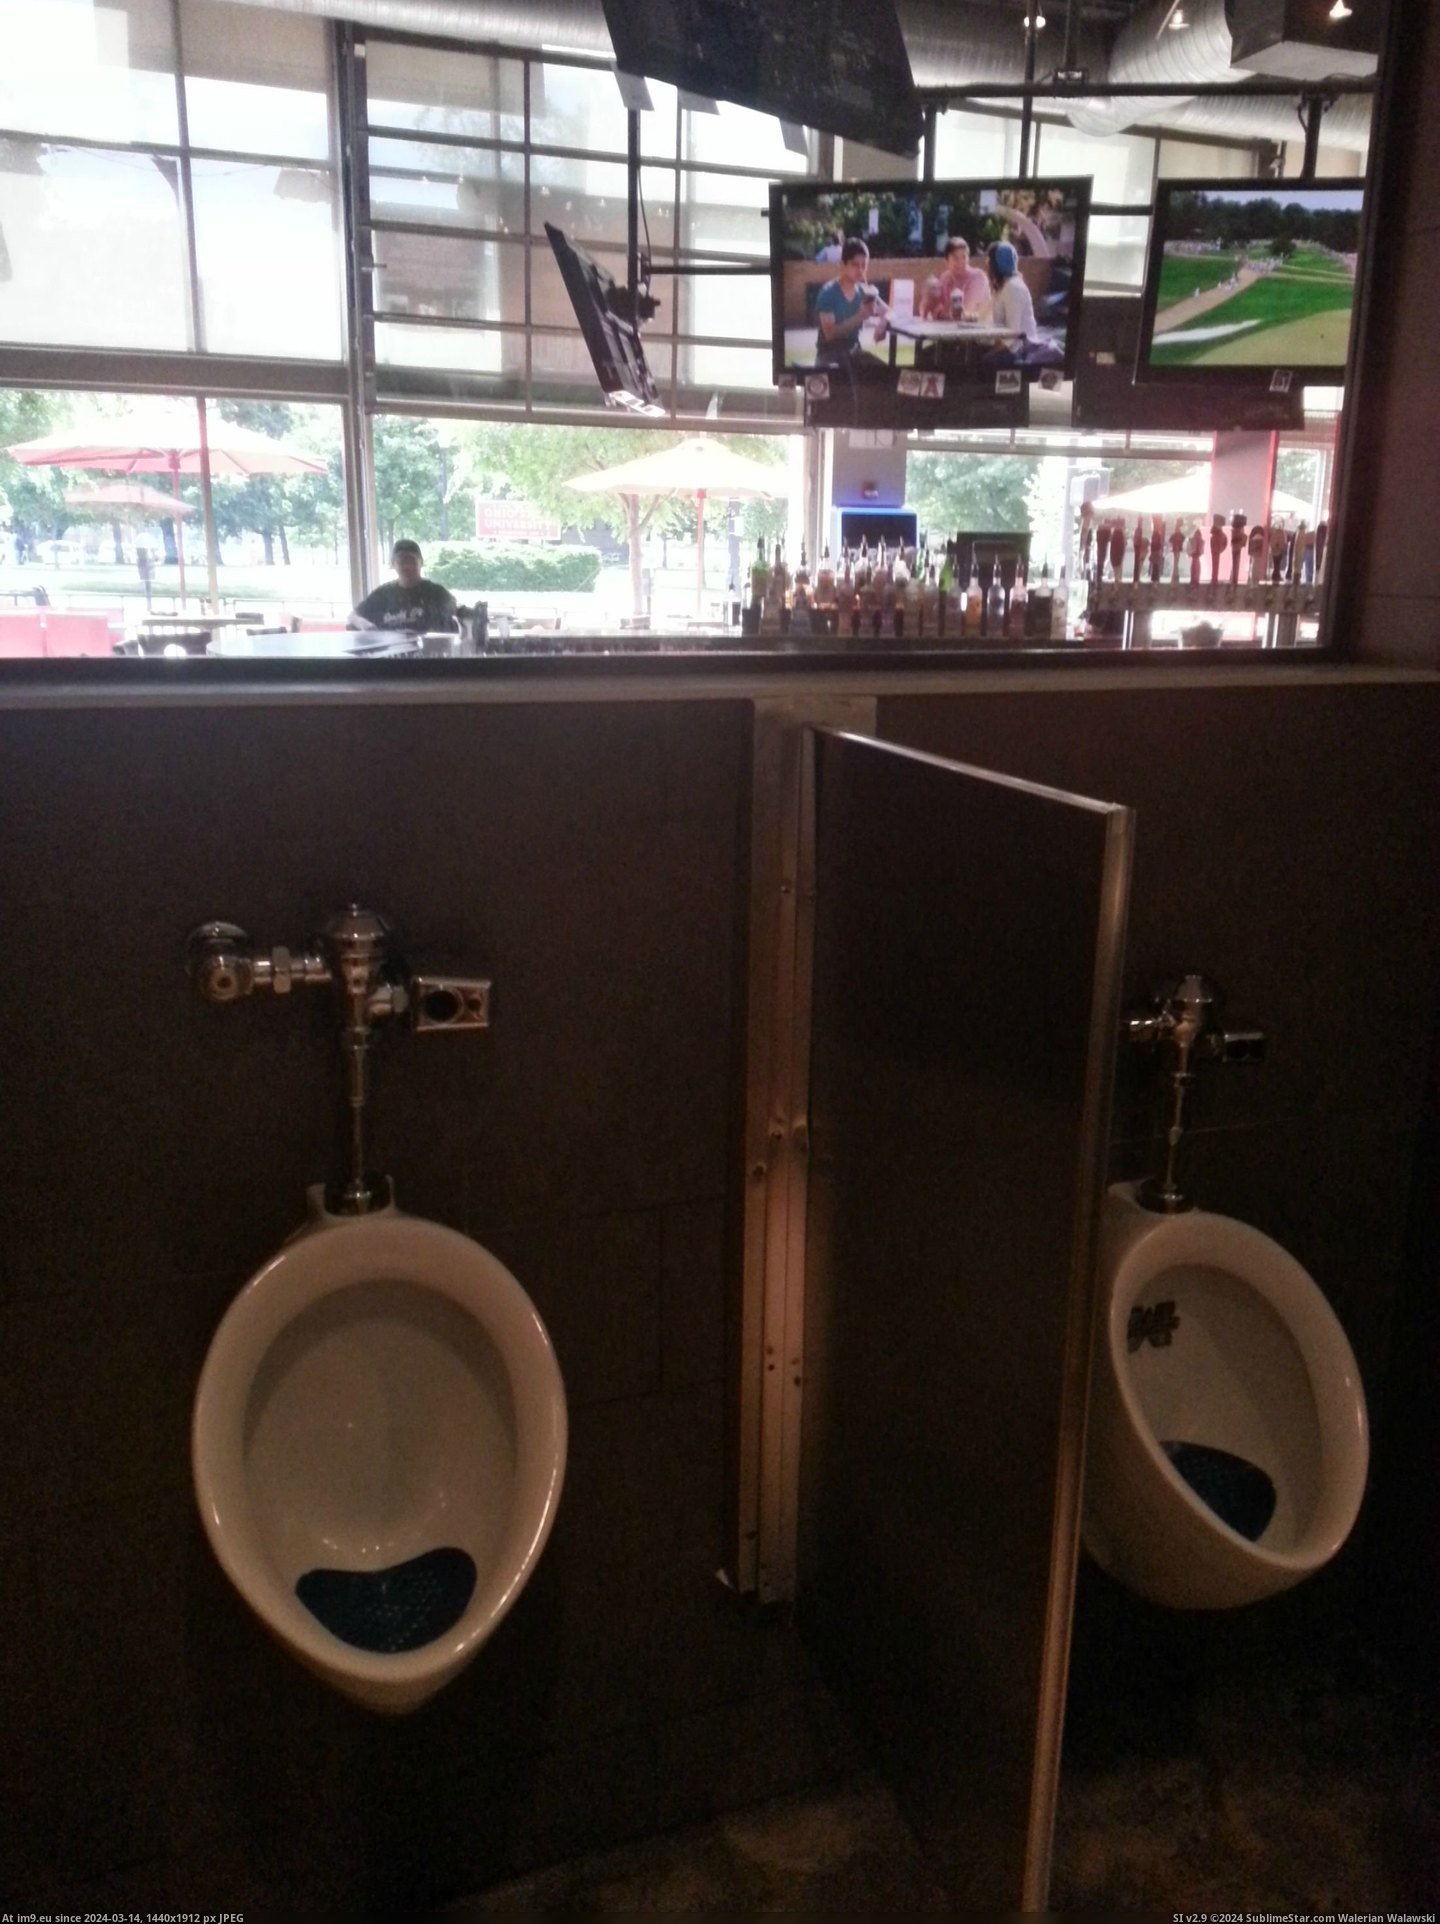 #One #You #Game #Any #Sports #Bathrooms #Way #Glass #Bar [Mildlyinteresting] This sports bar has one way glass in the bathrooms so you don't miss any of the game Pic. (Bild von album My r/MILDLYINTERESTING favs))